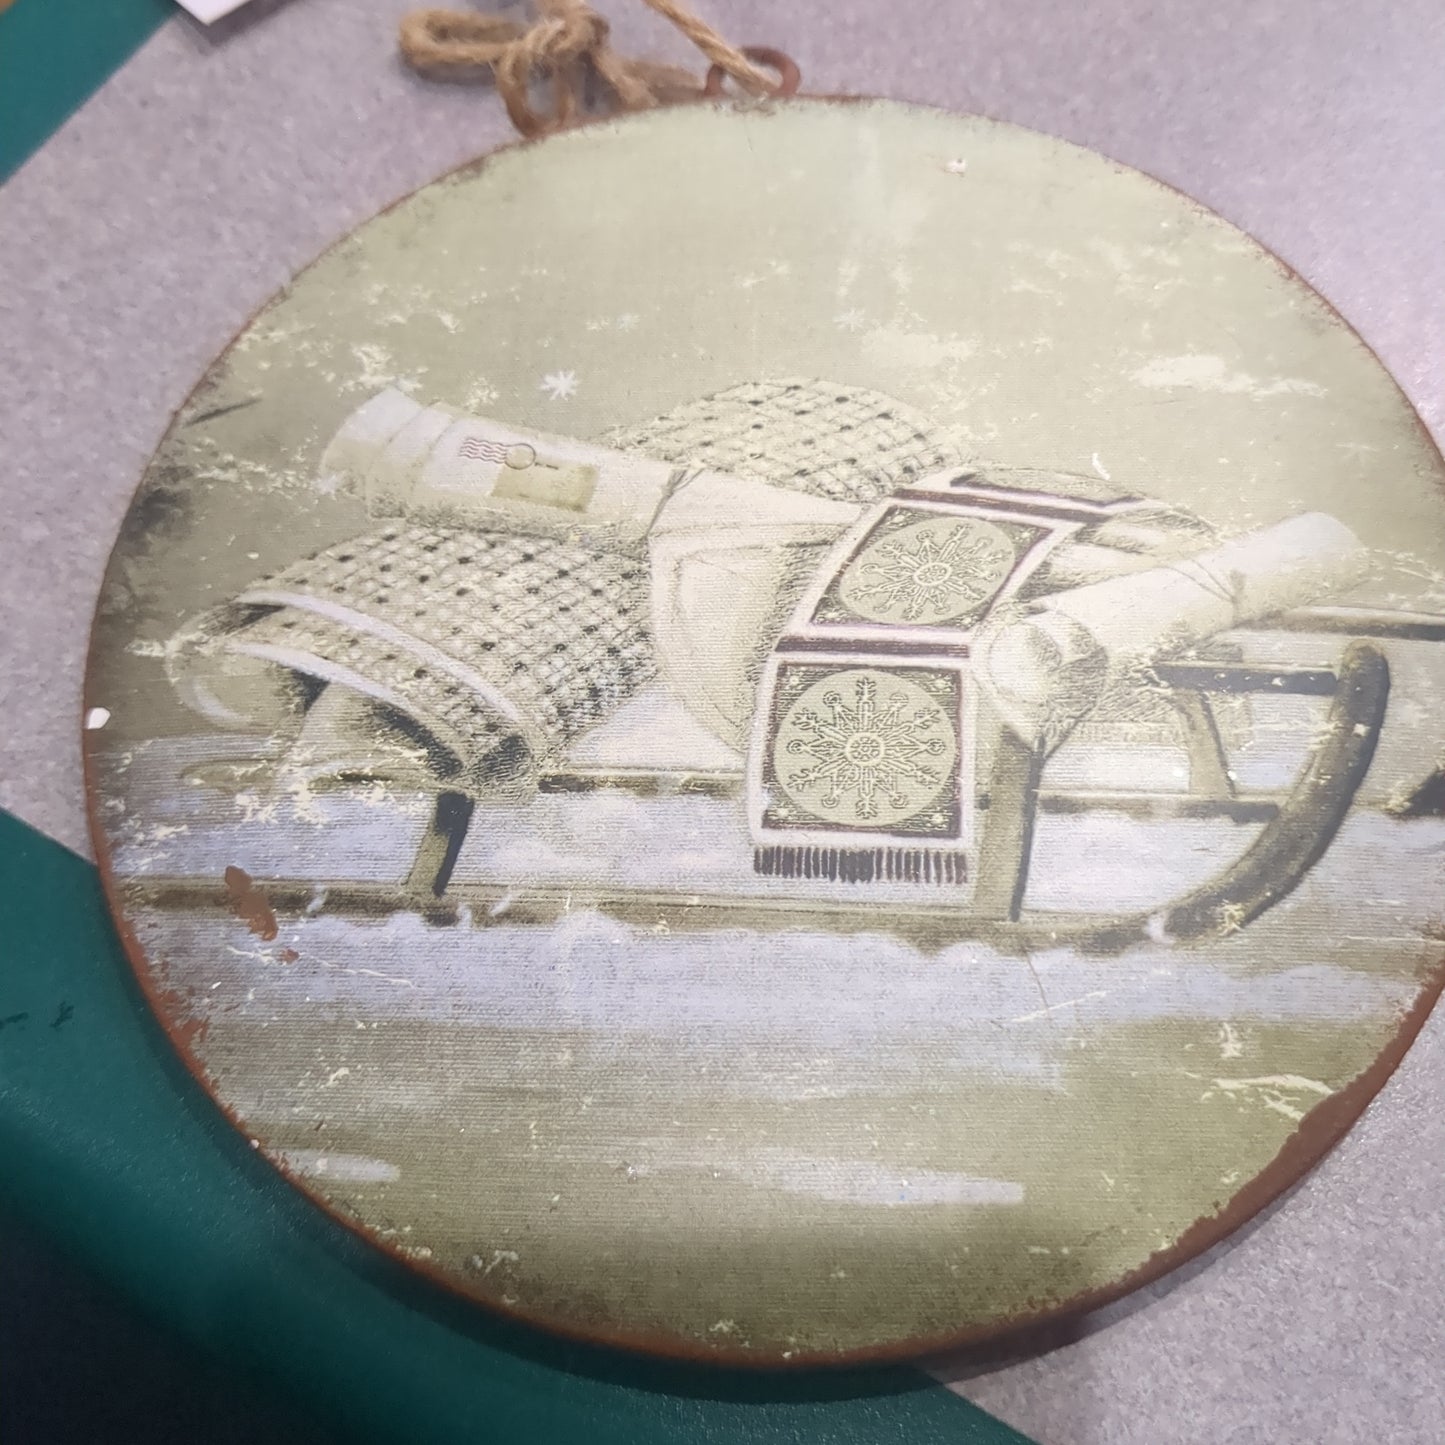 6 inch tin ornament with a sled